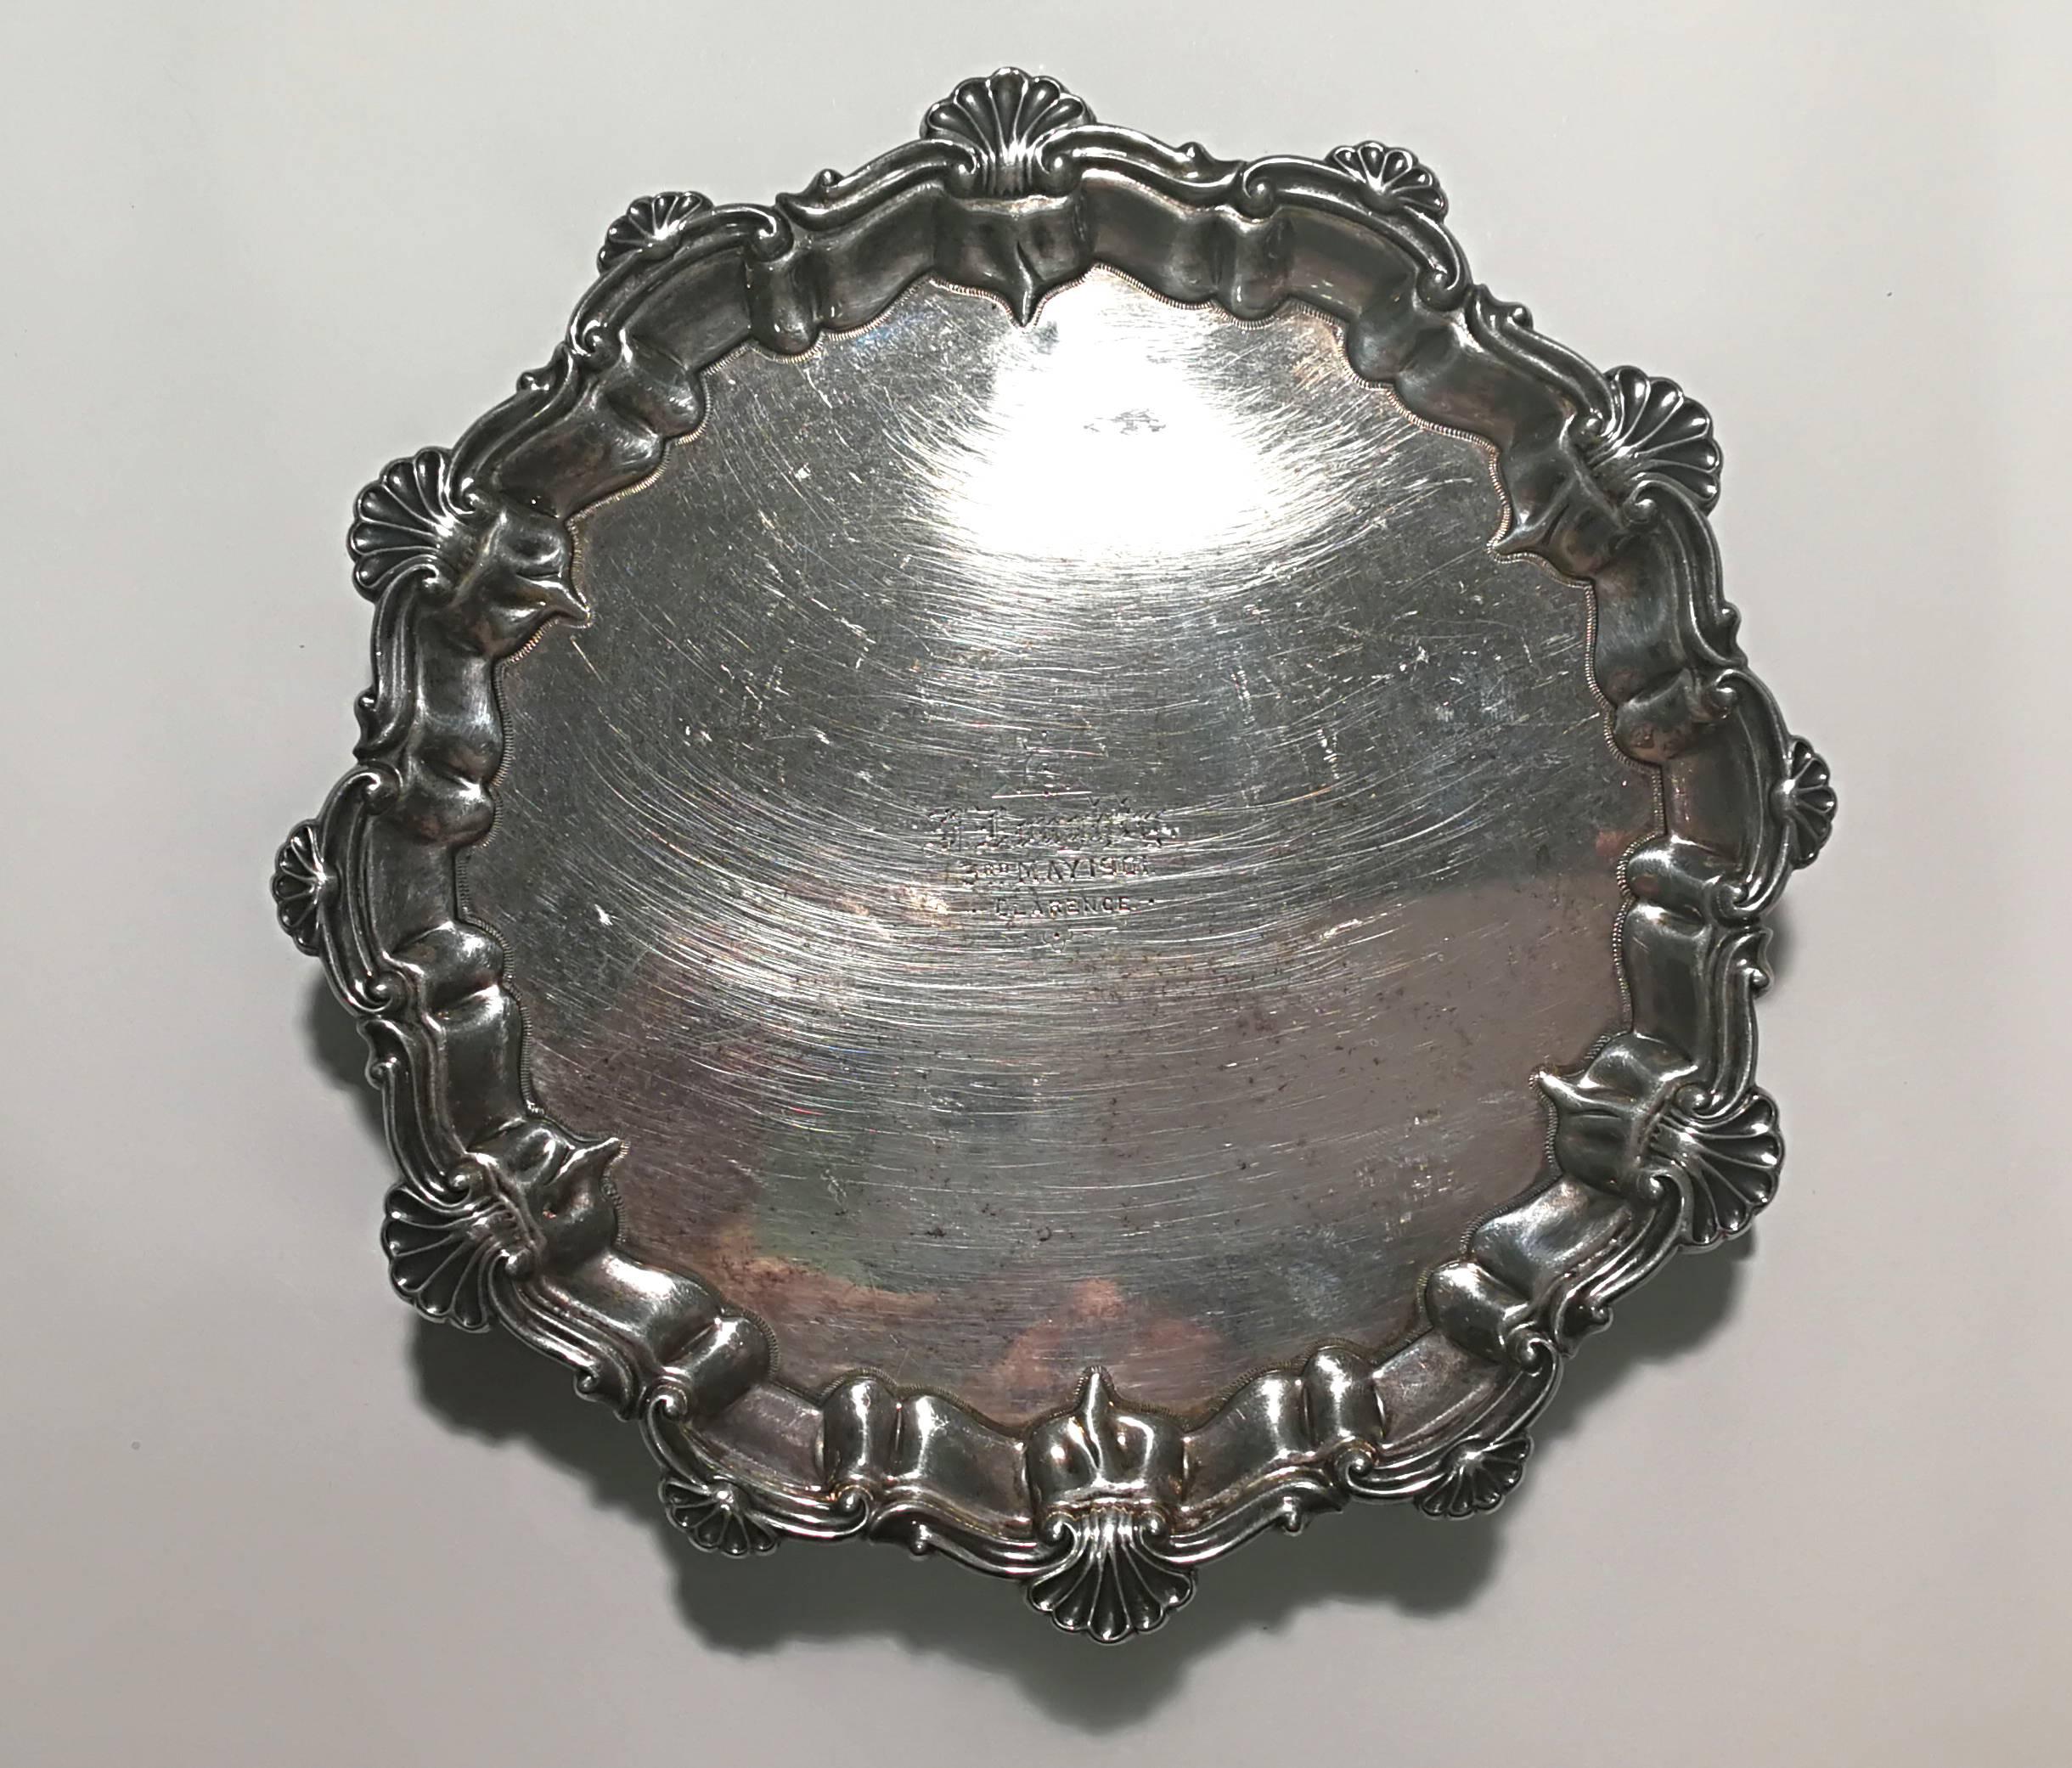 Very nice silver dish. Embossed and chiselled edges and three support feet. English manufacture.